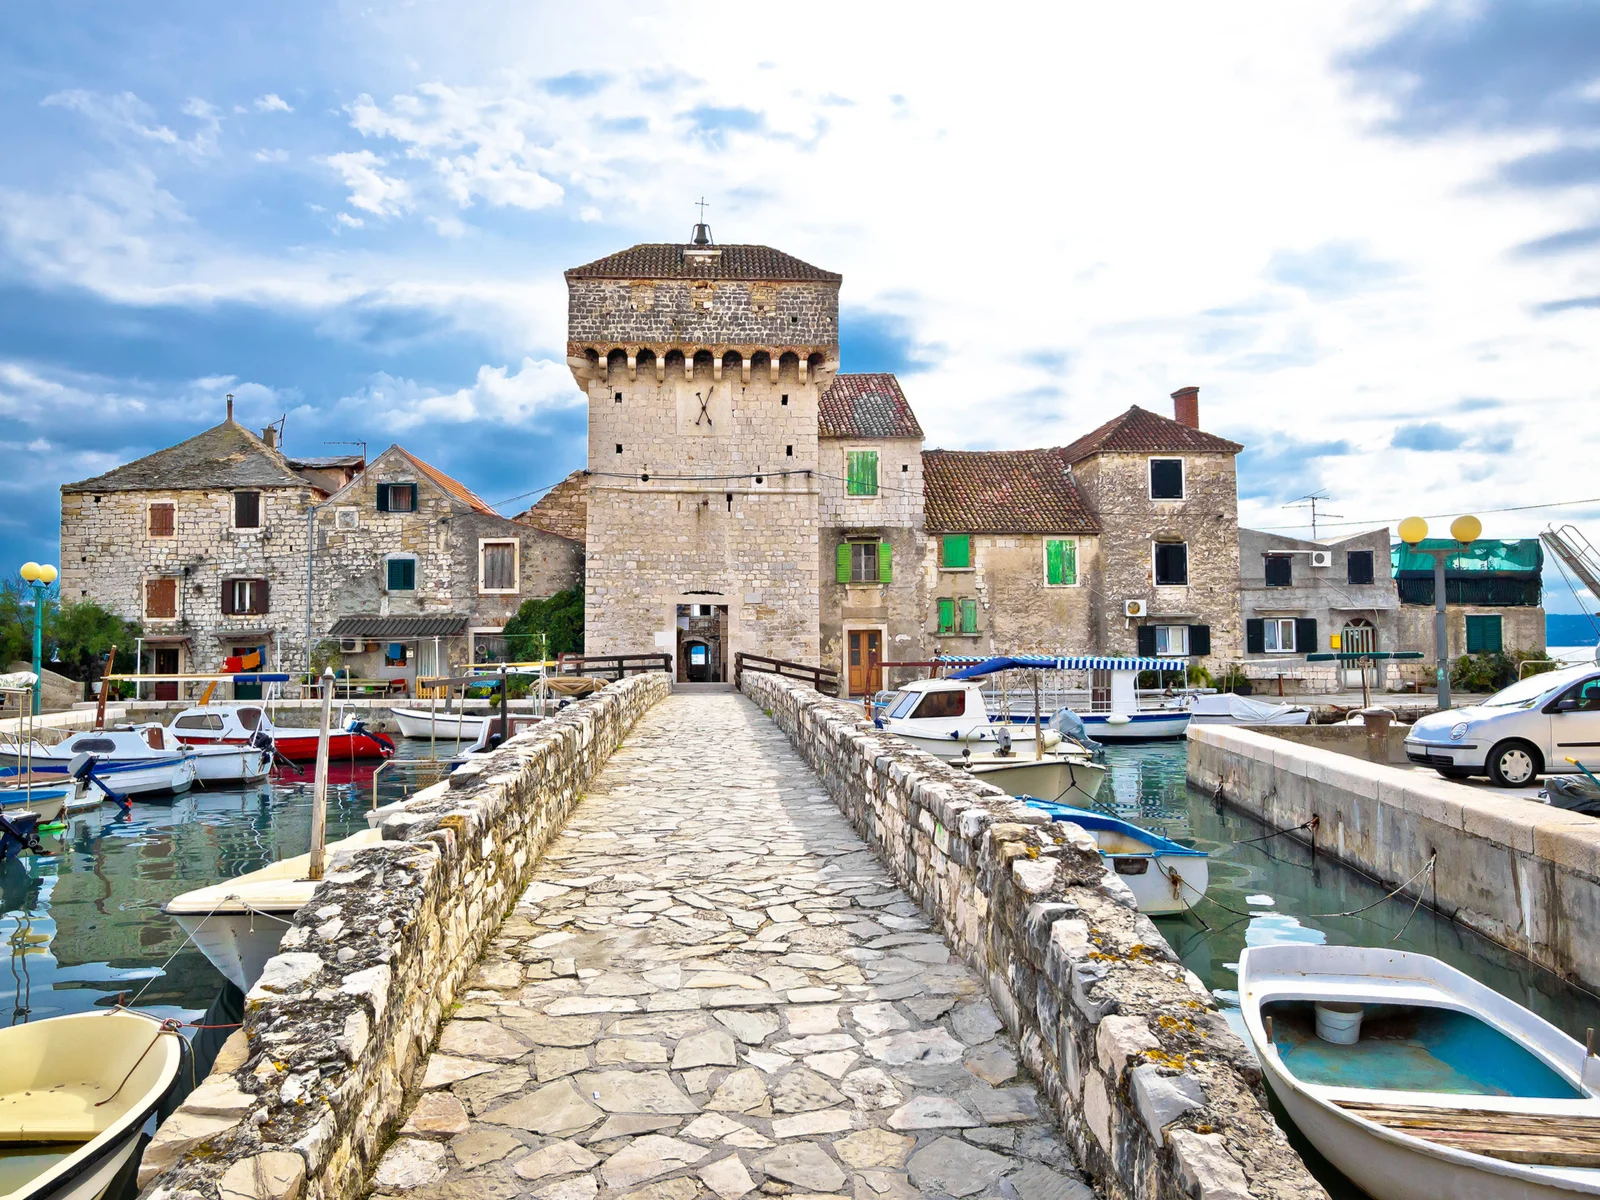 Split, Croatia, pictured outside the Kastel Gomilica, one of the best things to do in Croatia